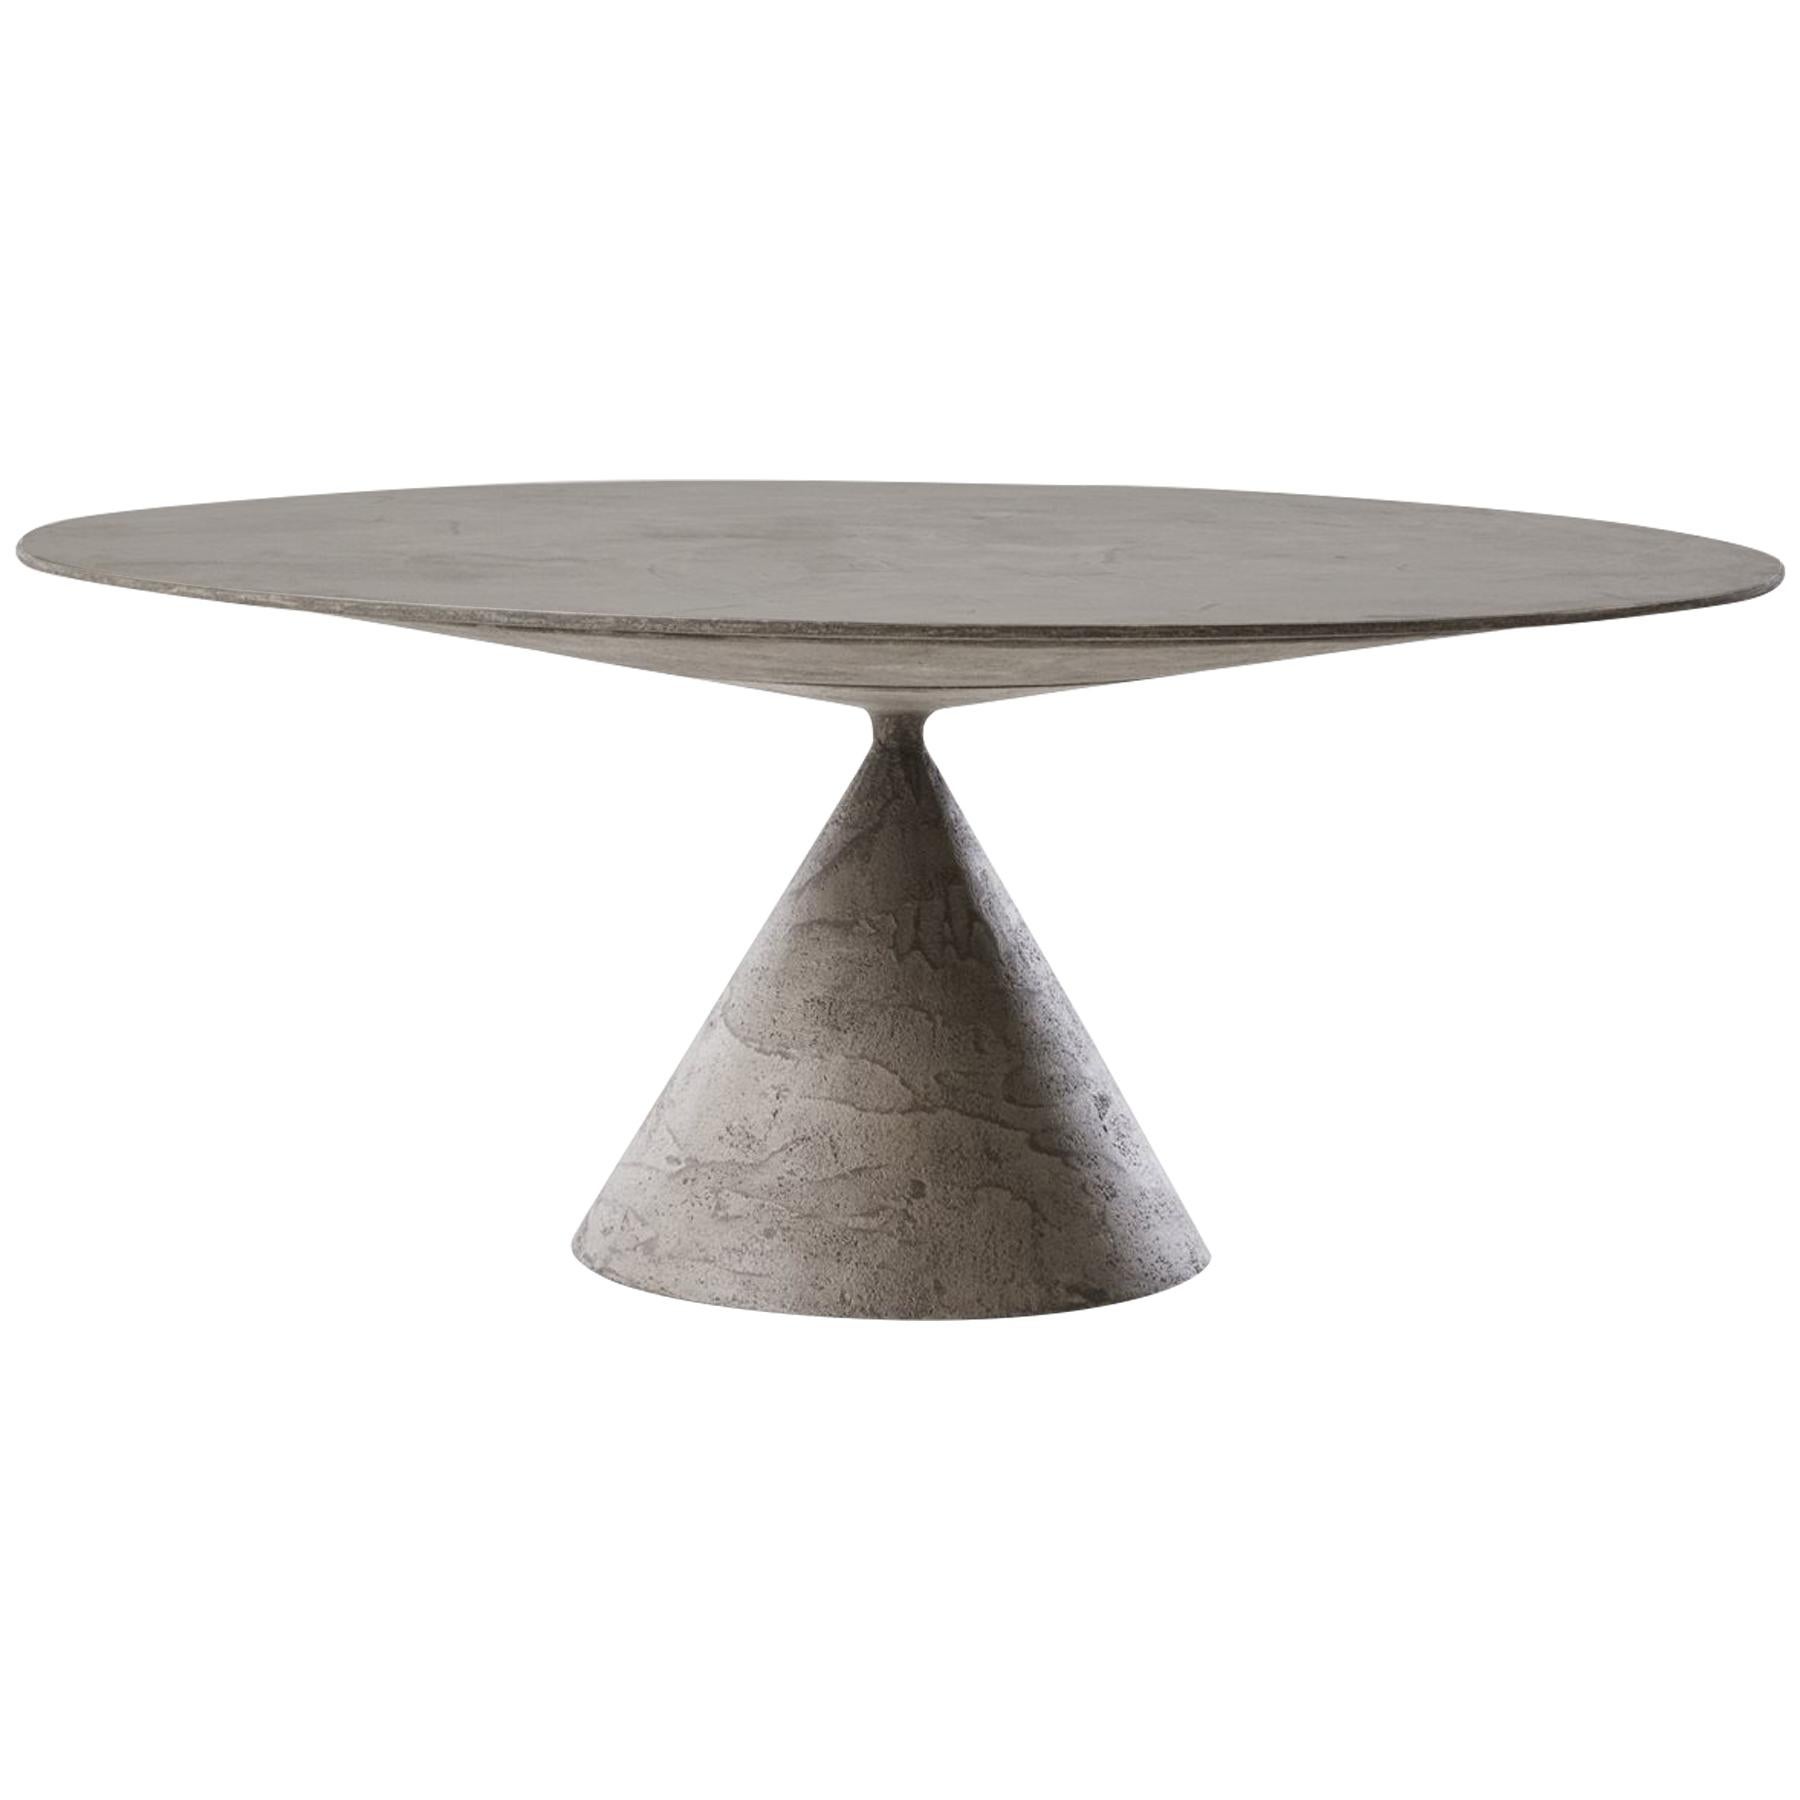 Customizable Desalto Clay Oval Table Designed by Marc Krusin